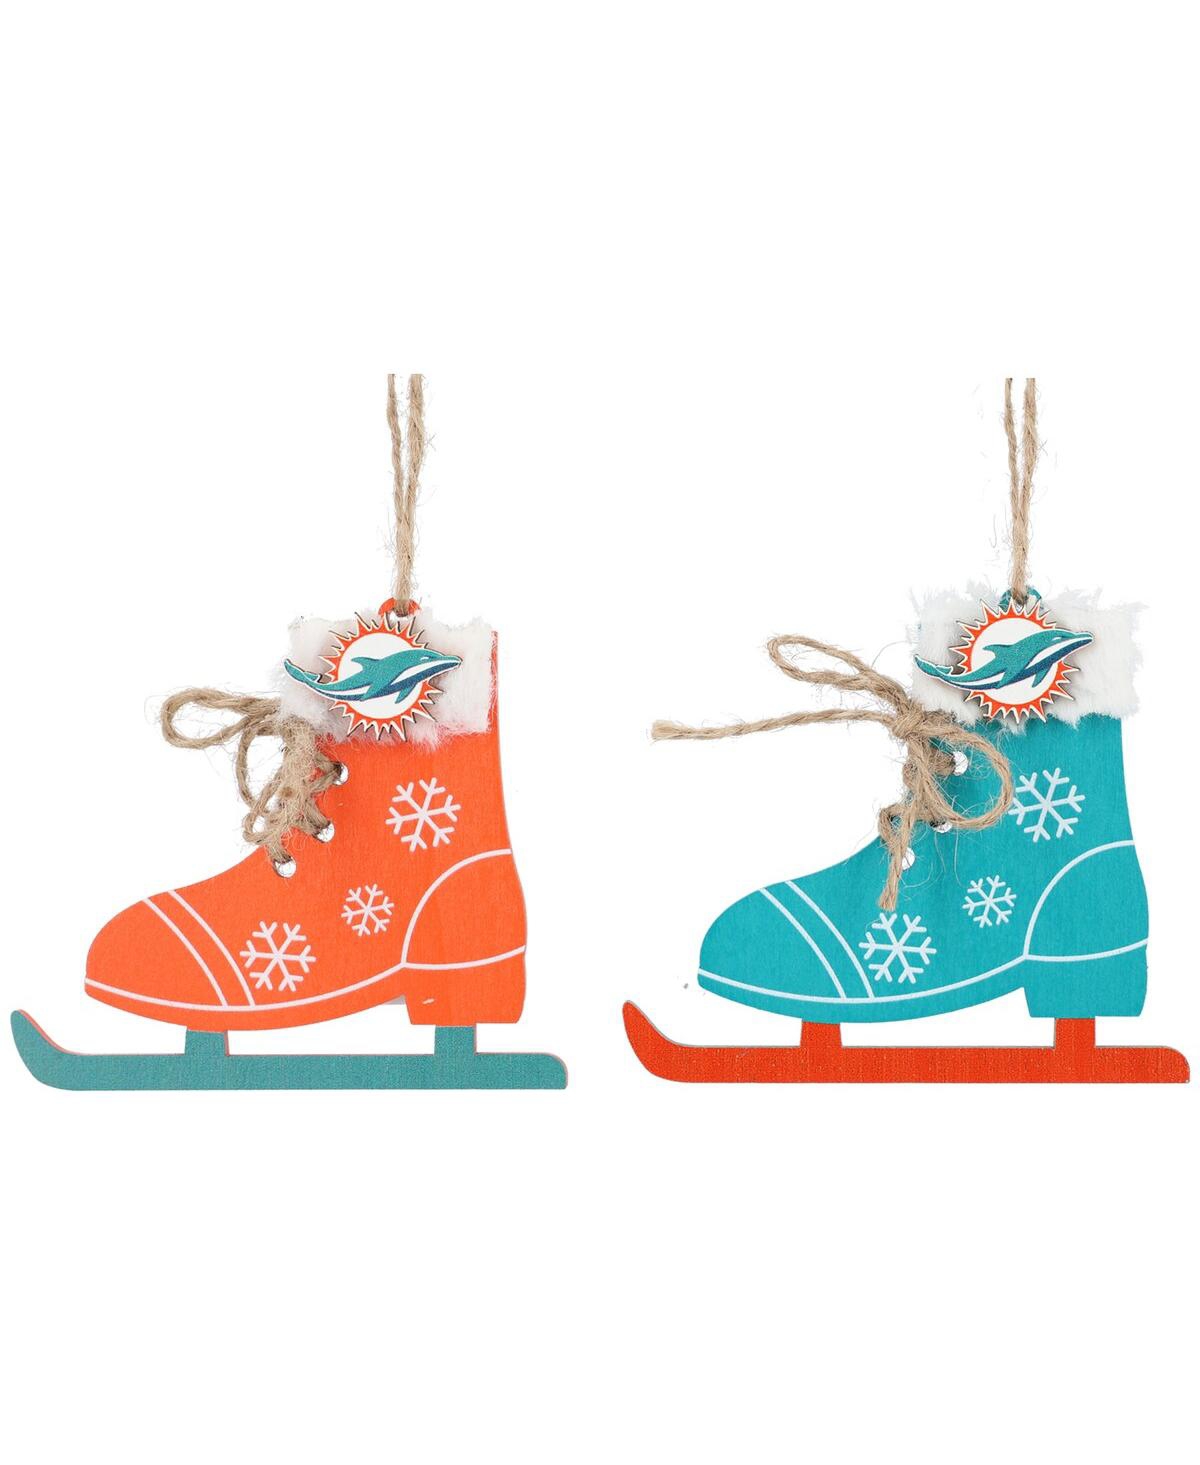 The Memory Company Miami Dolphins Two-Pack Ice Skate Ornament Set - Orange, Blue